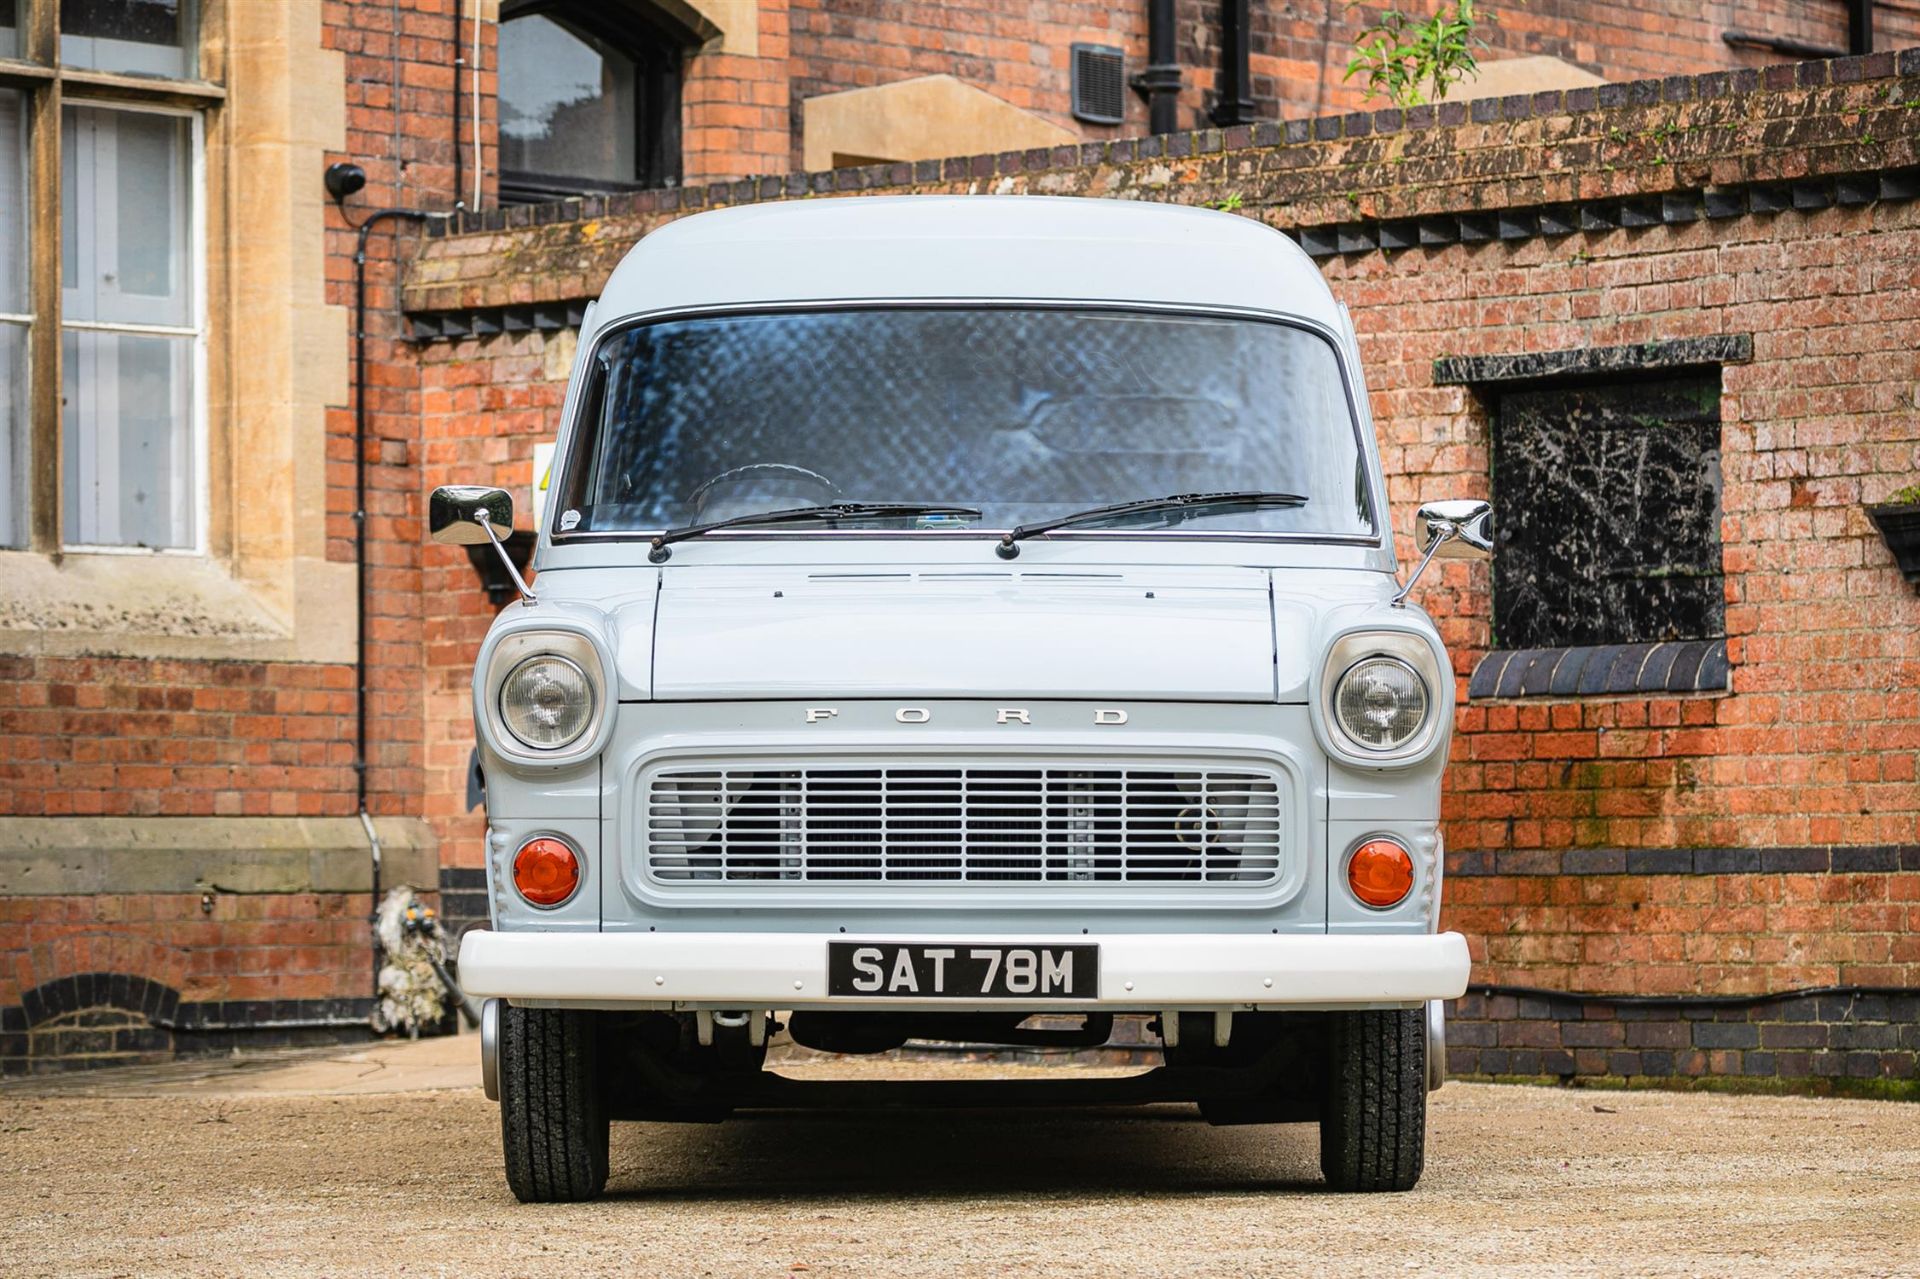 1974 Ford Transit Mk1 LWB Twin Wheel - Ex-Wheeler Dealers - Offered Directly From Mike Brewer - Bild 6 aus 10